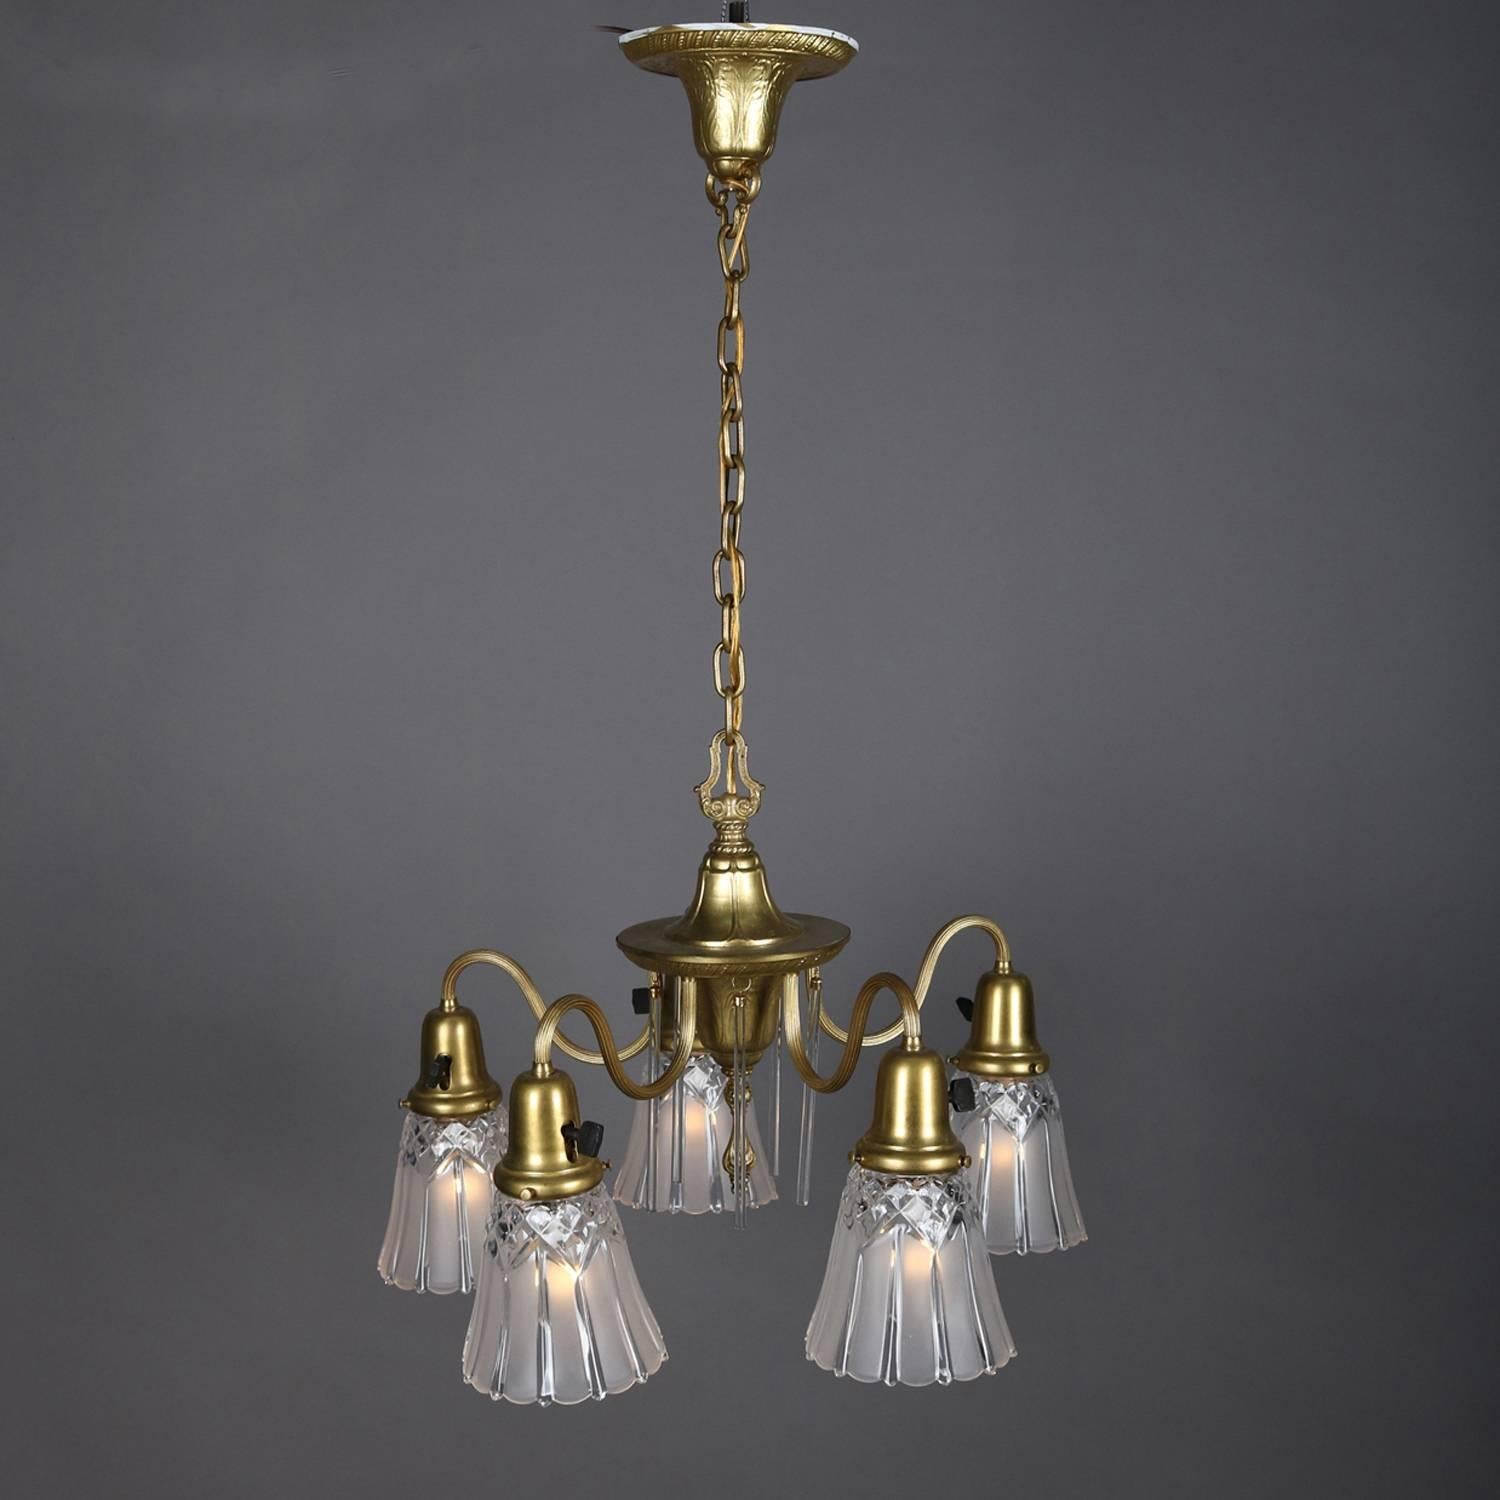 Frosted Neoclassical Style Five-Light Gilt & Crystal Chandelier by Williamson circa 1940